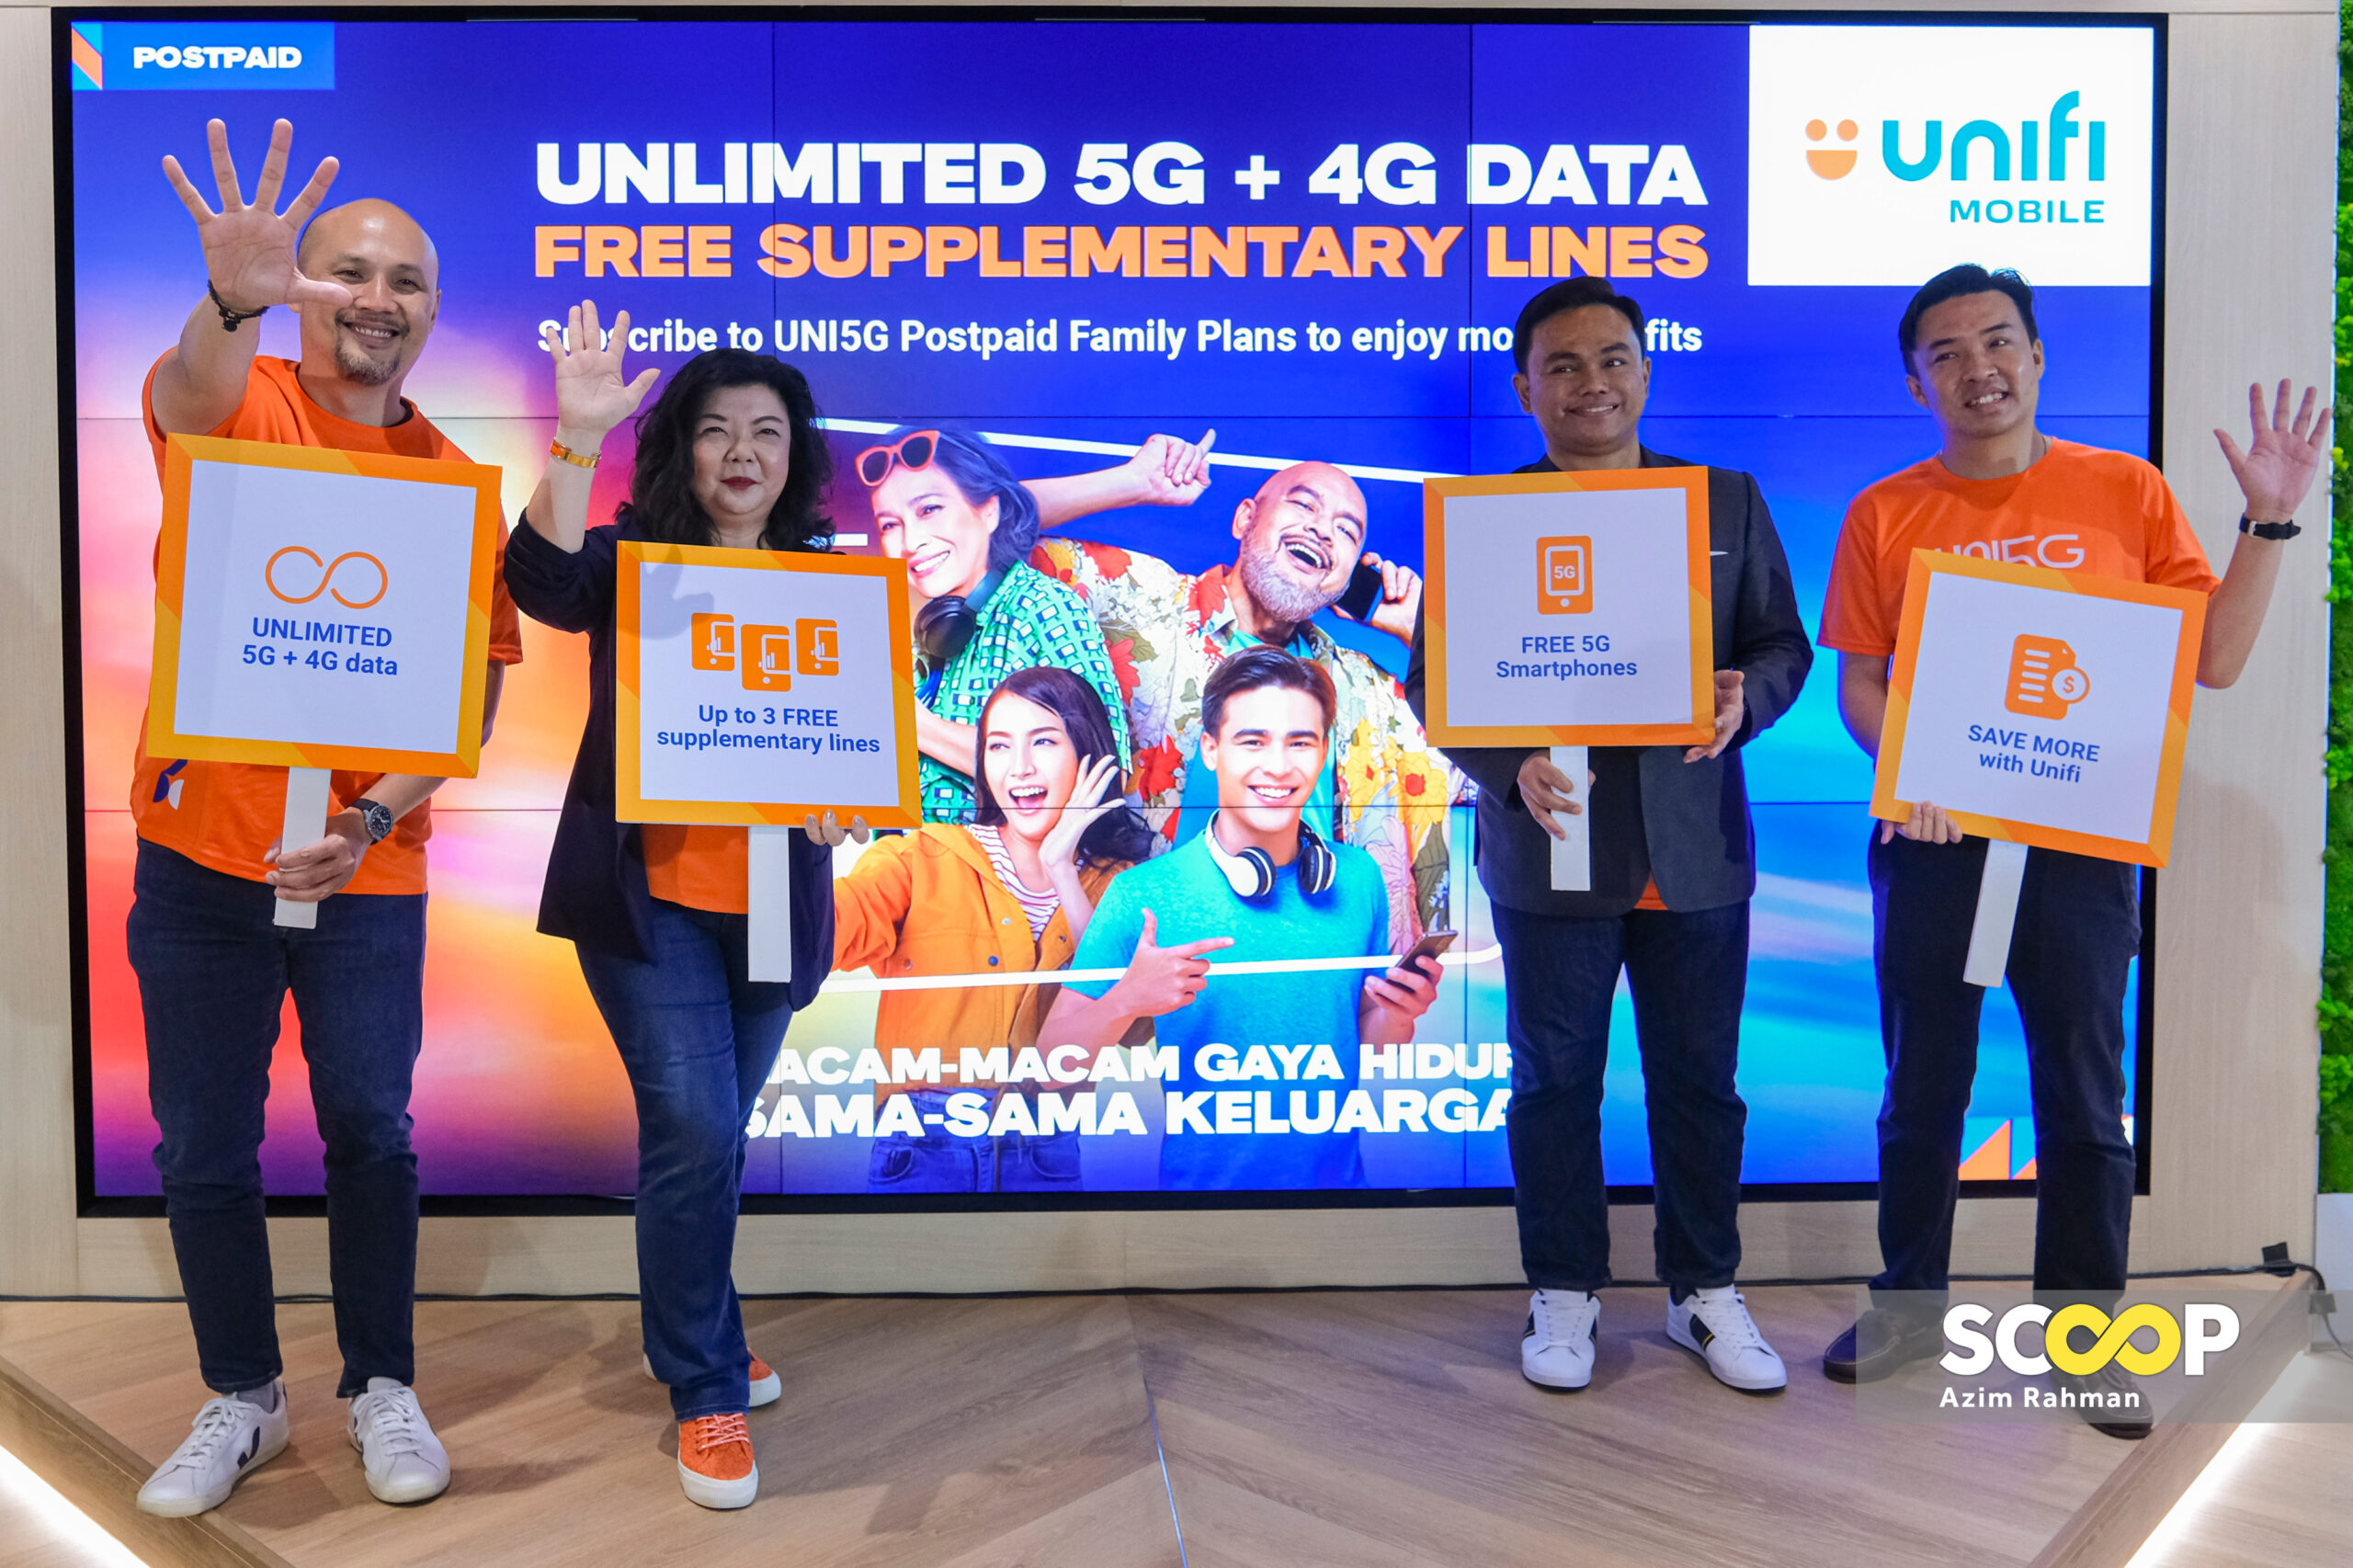 Unifi's UNI5G Postpaid Family plan boasts unlimited 5G+4G data, free smartphone at RM129